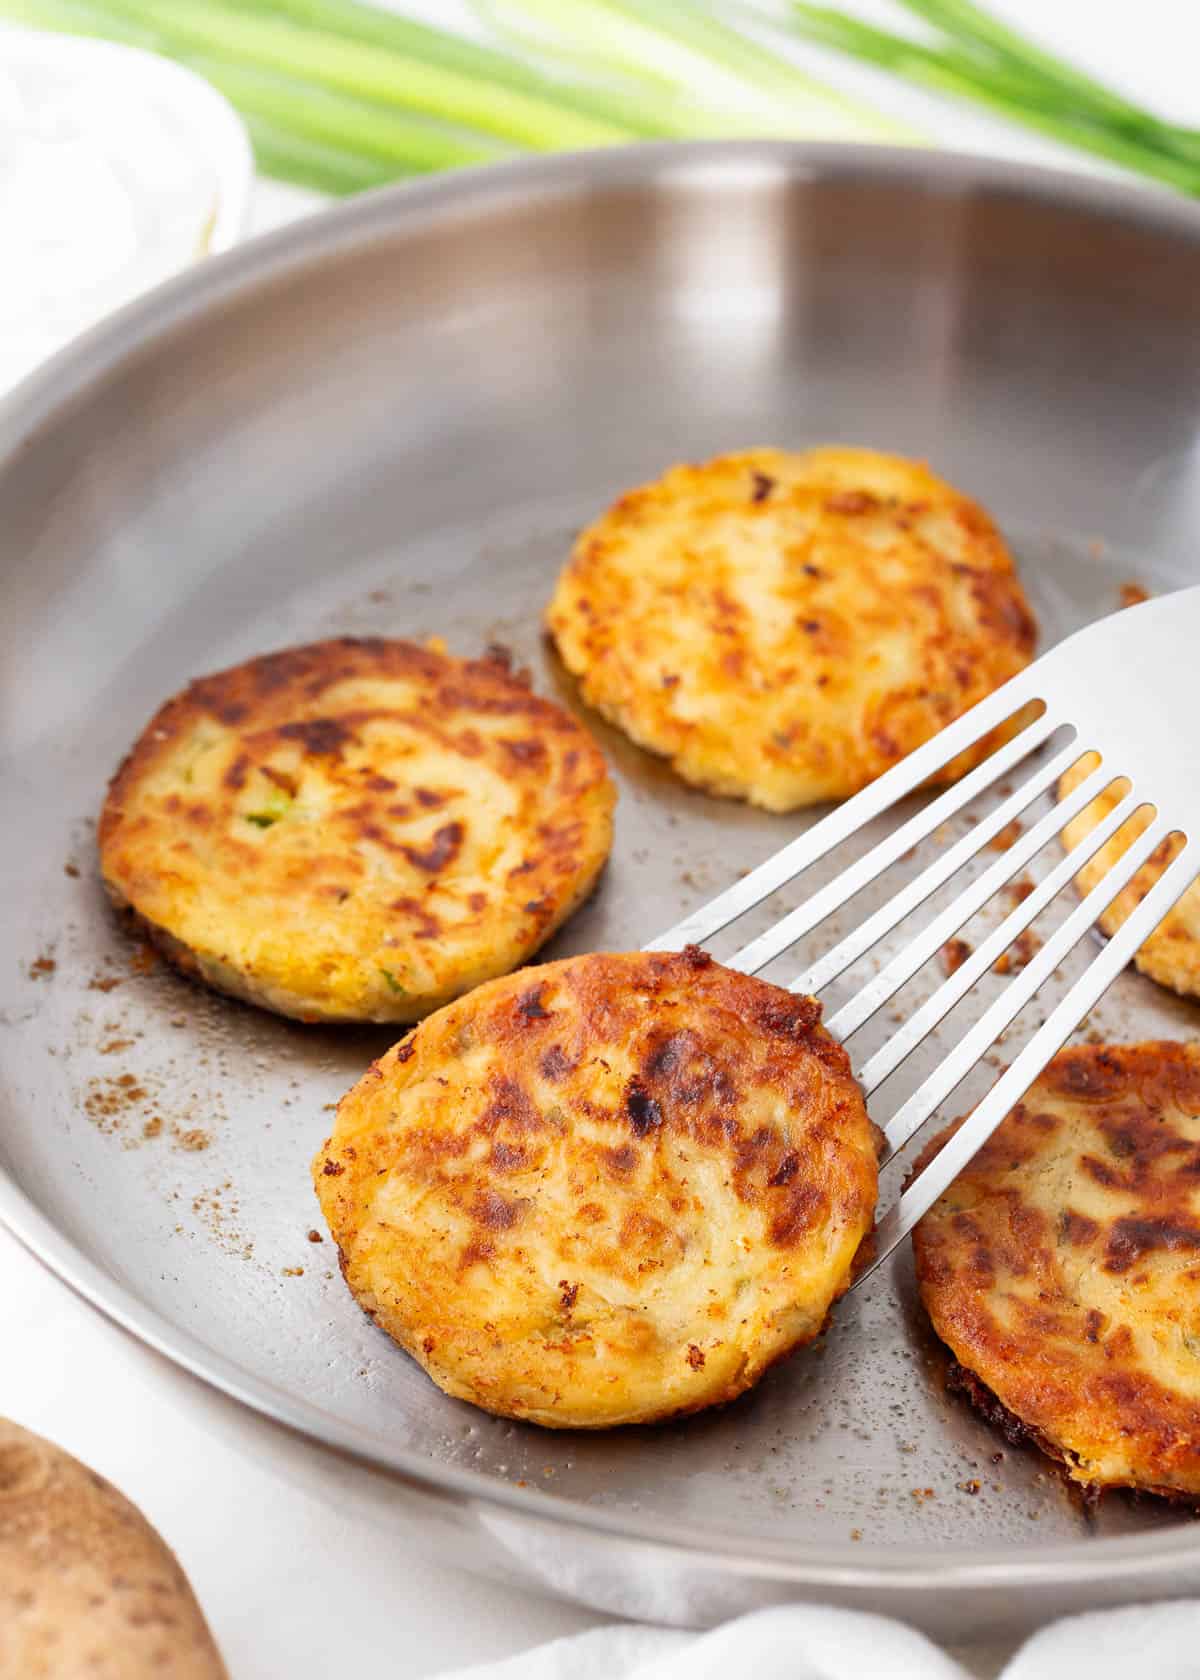 Cooking mashed potato pancakes in a skillet.